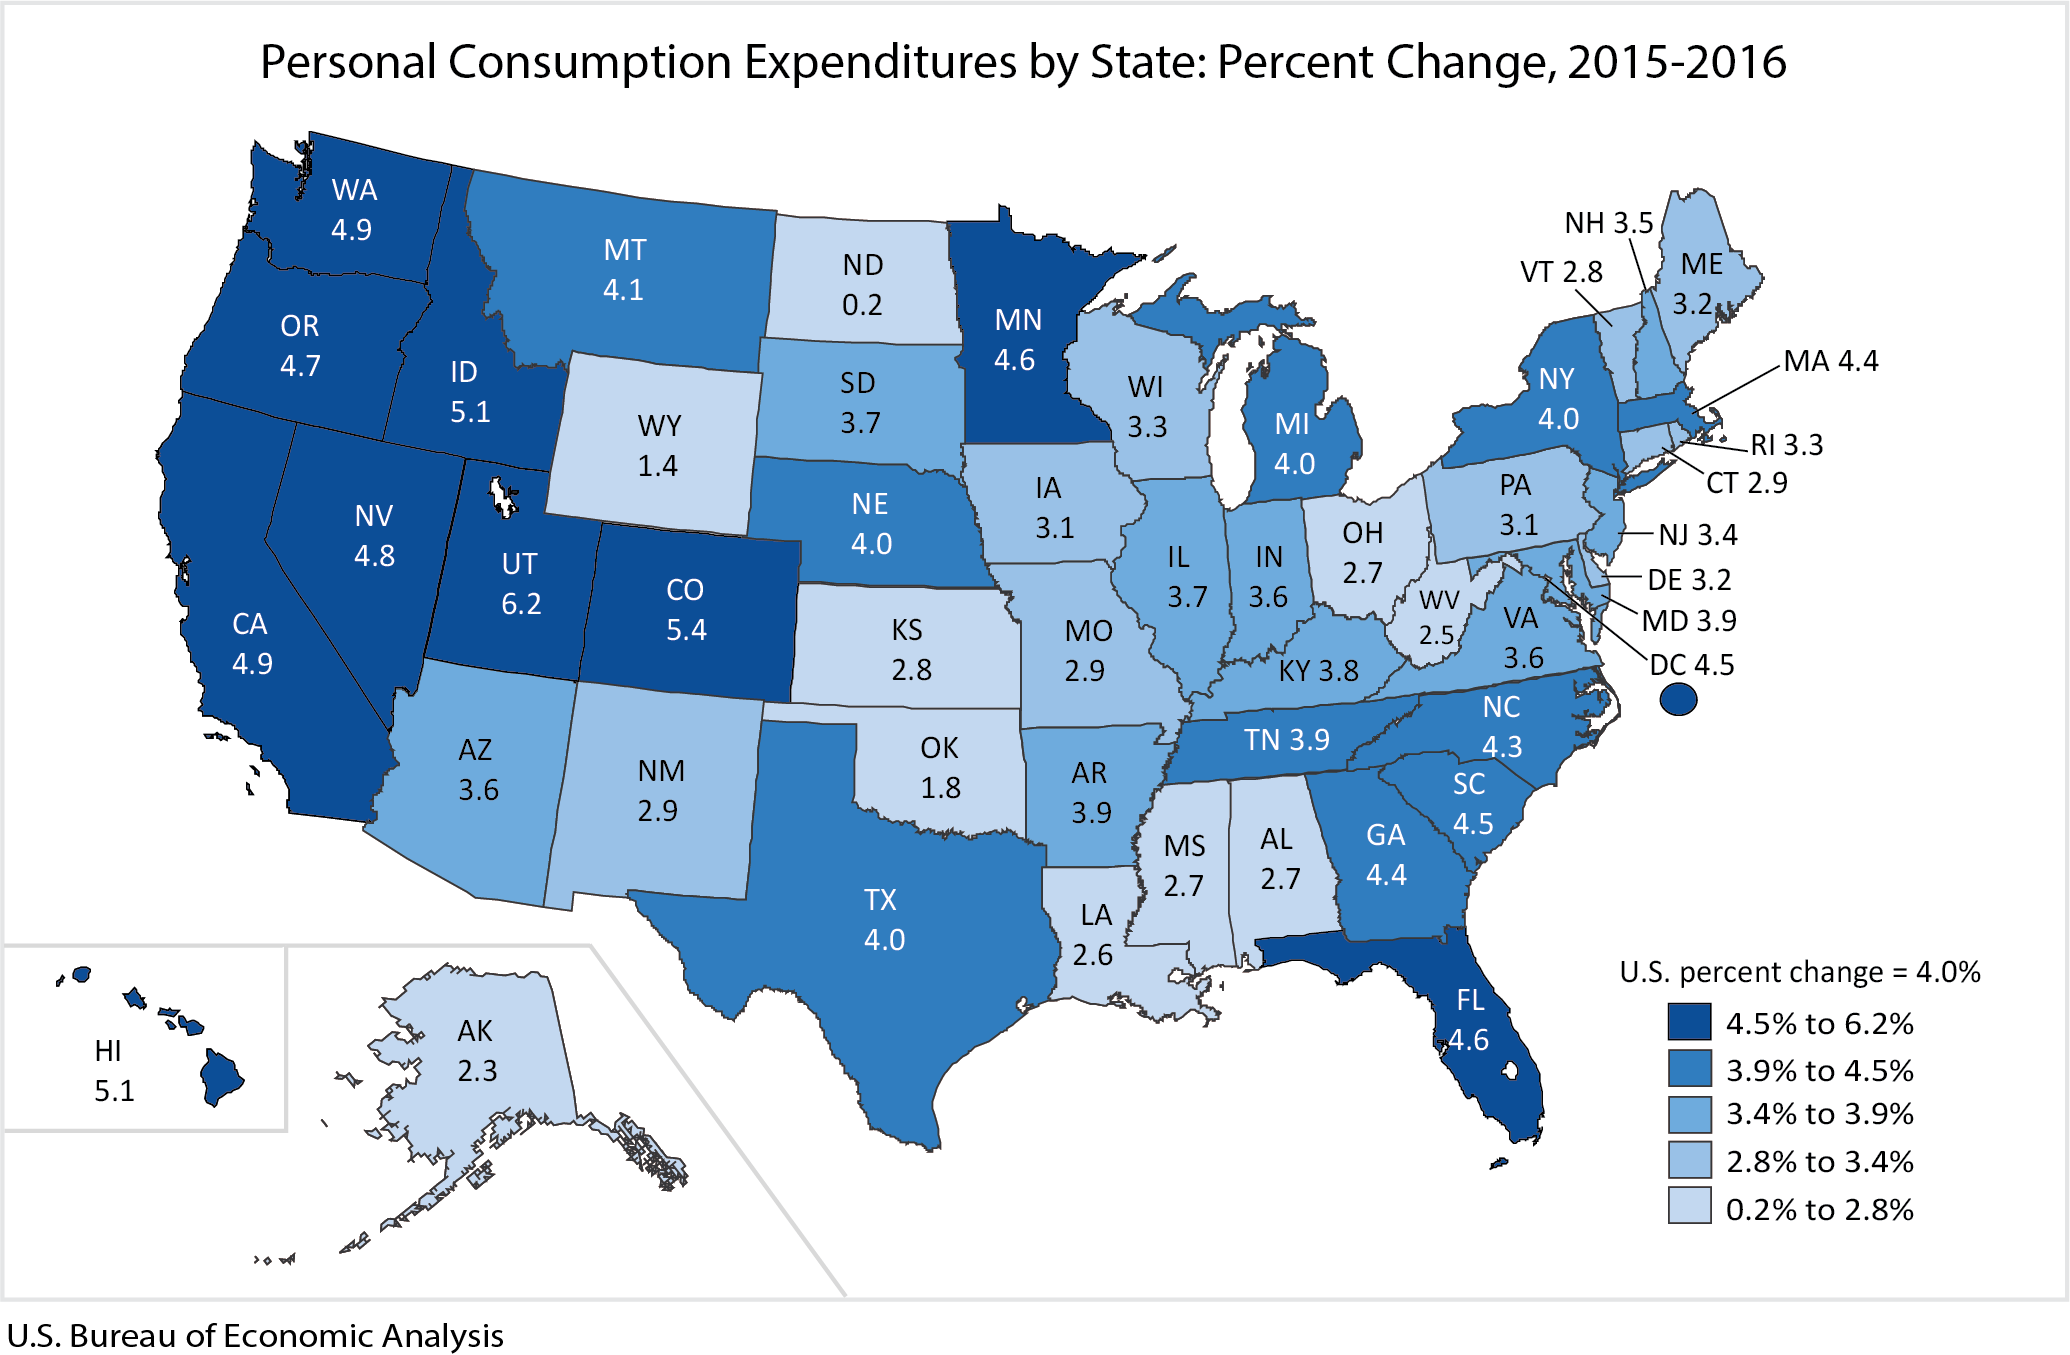 Map of US, Percent Change in Personal Consumption Expenditures by State, 2015 - 2016